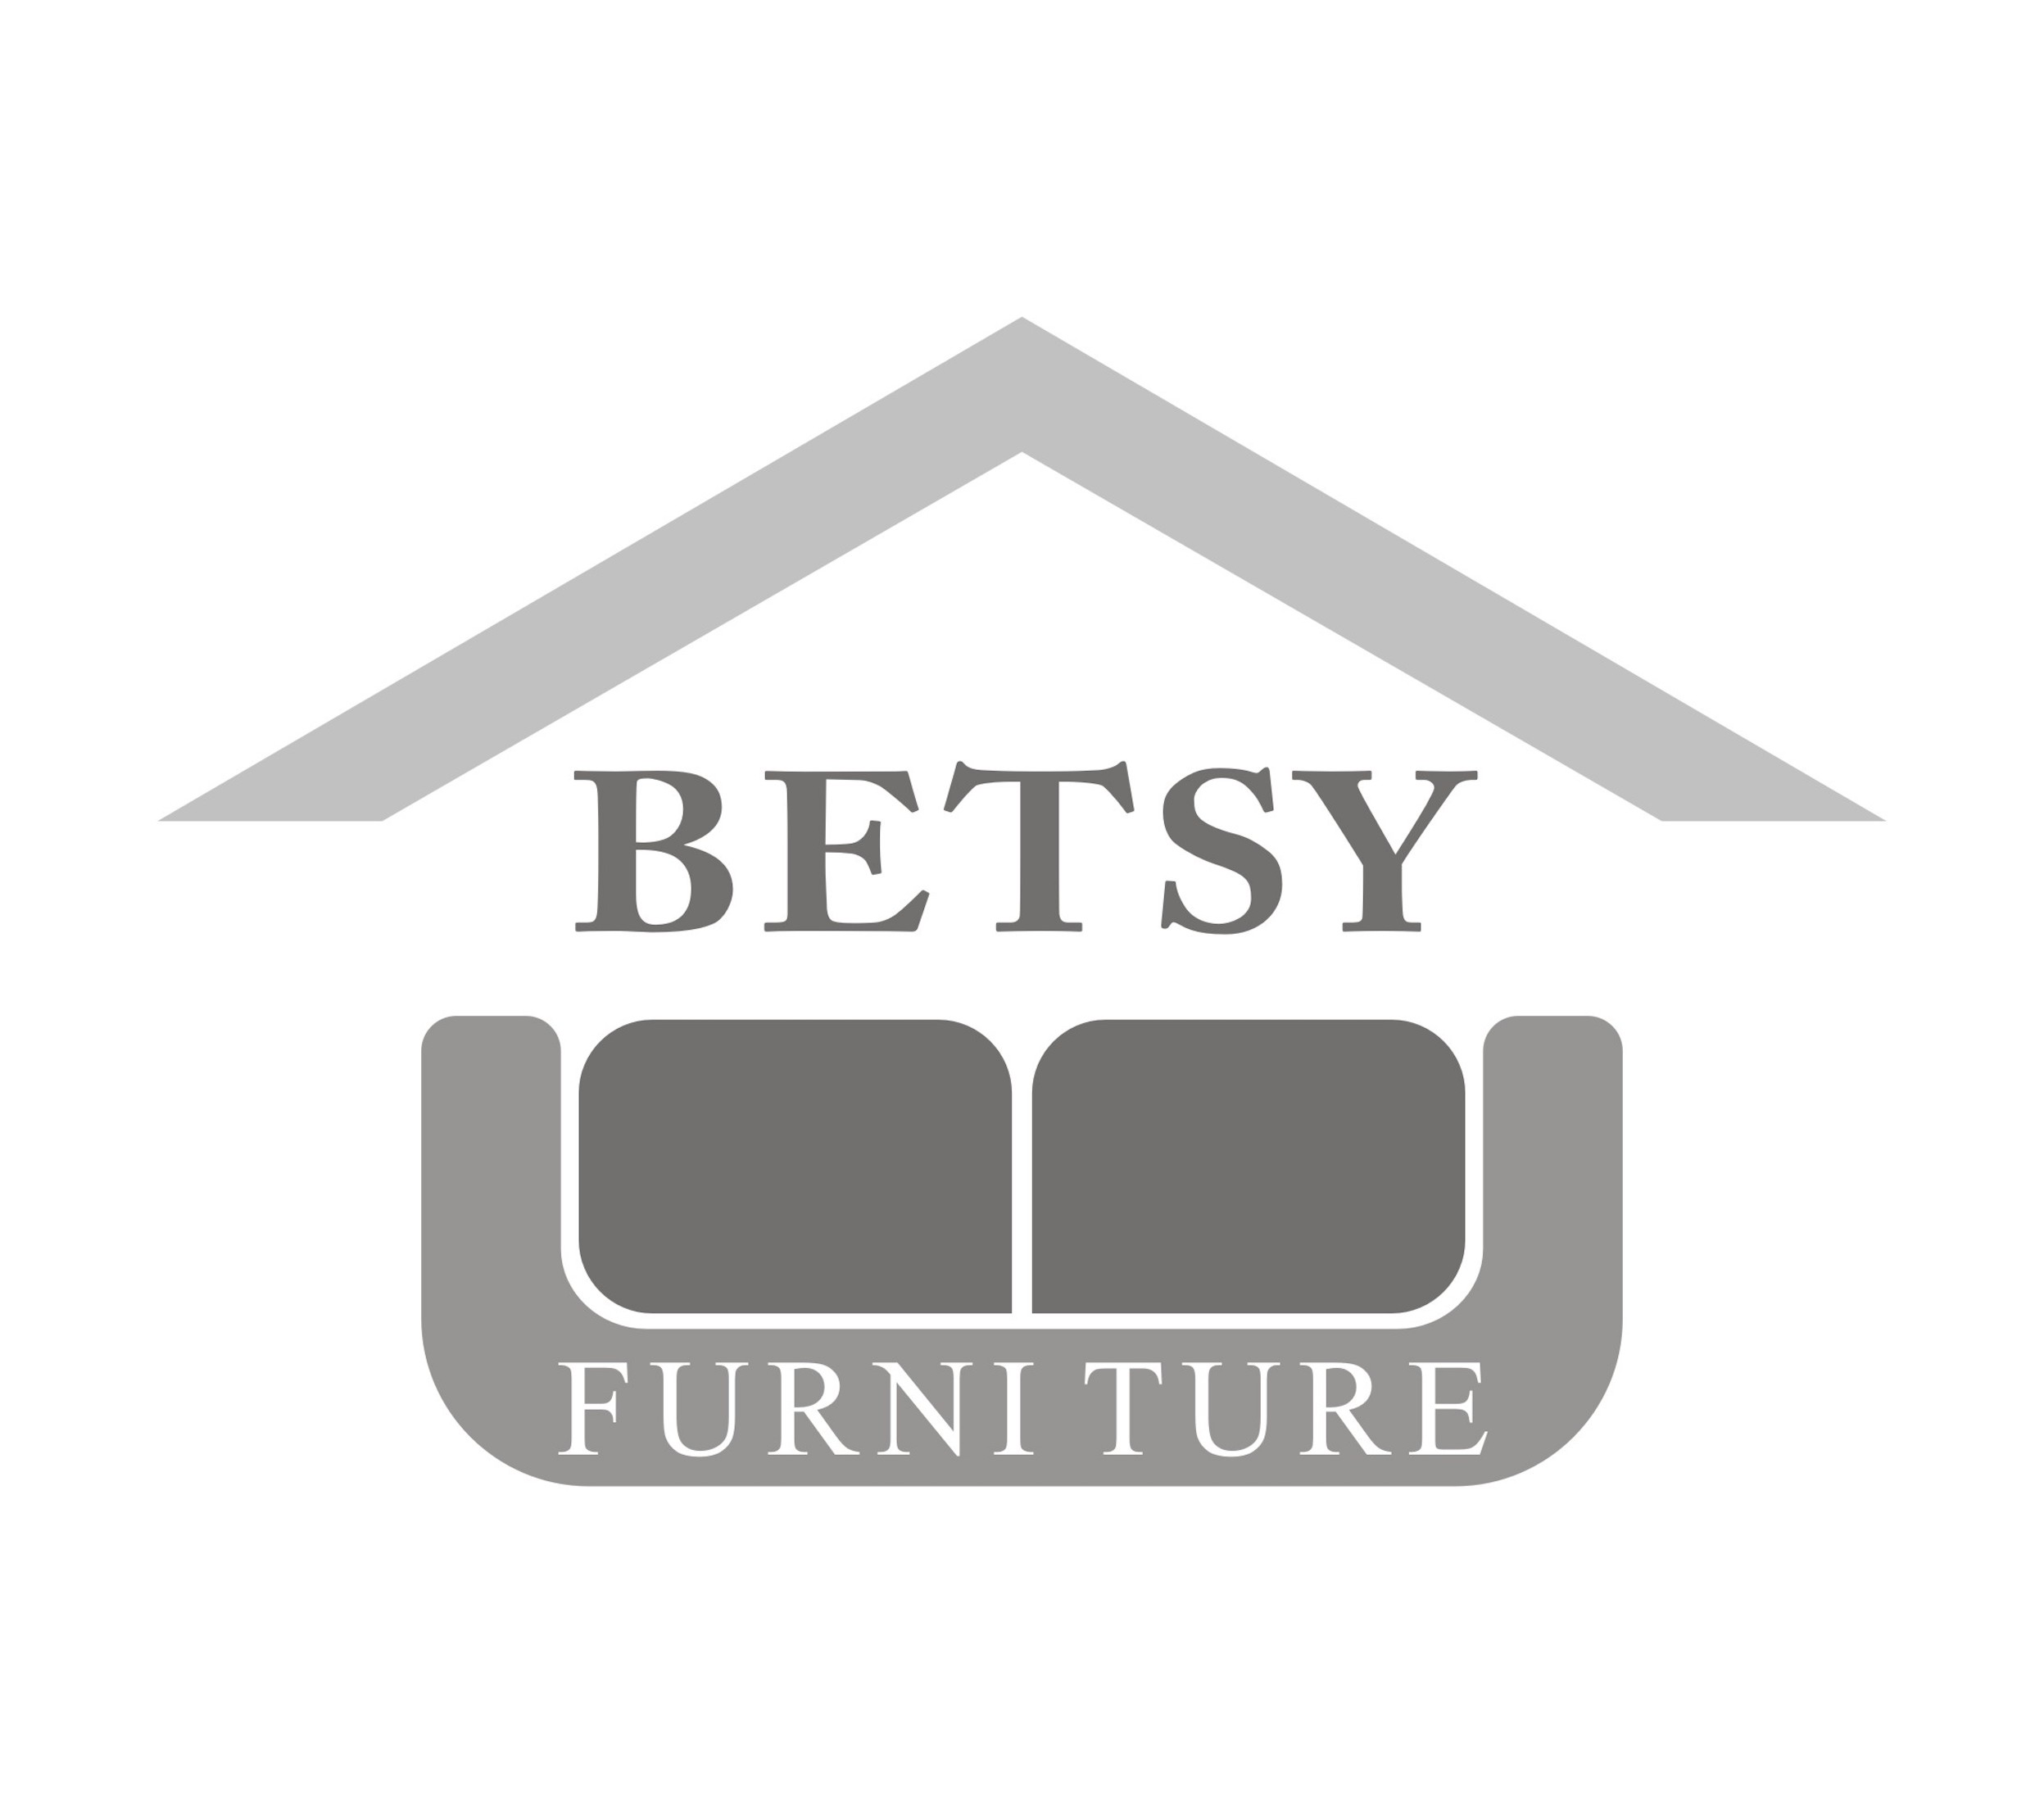 Betsy Furniture